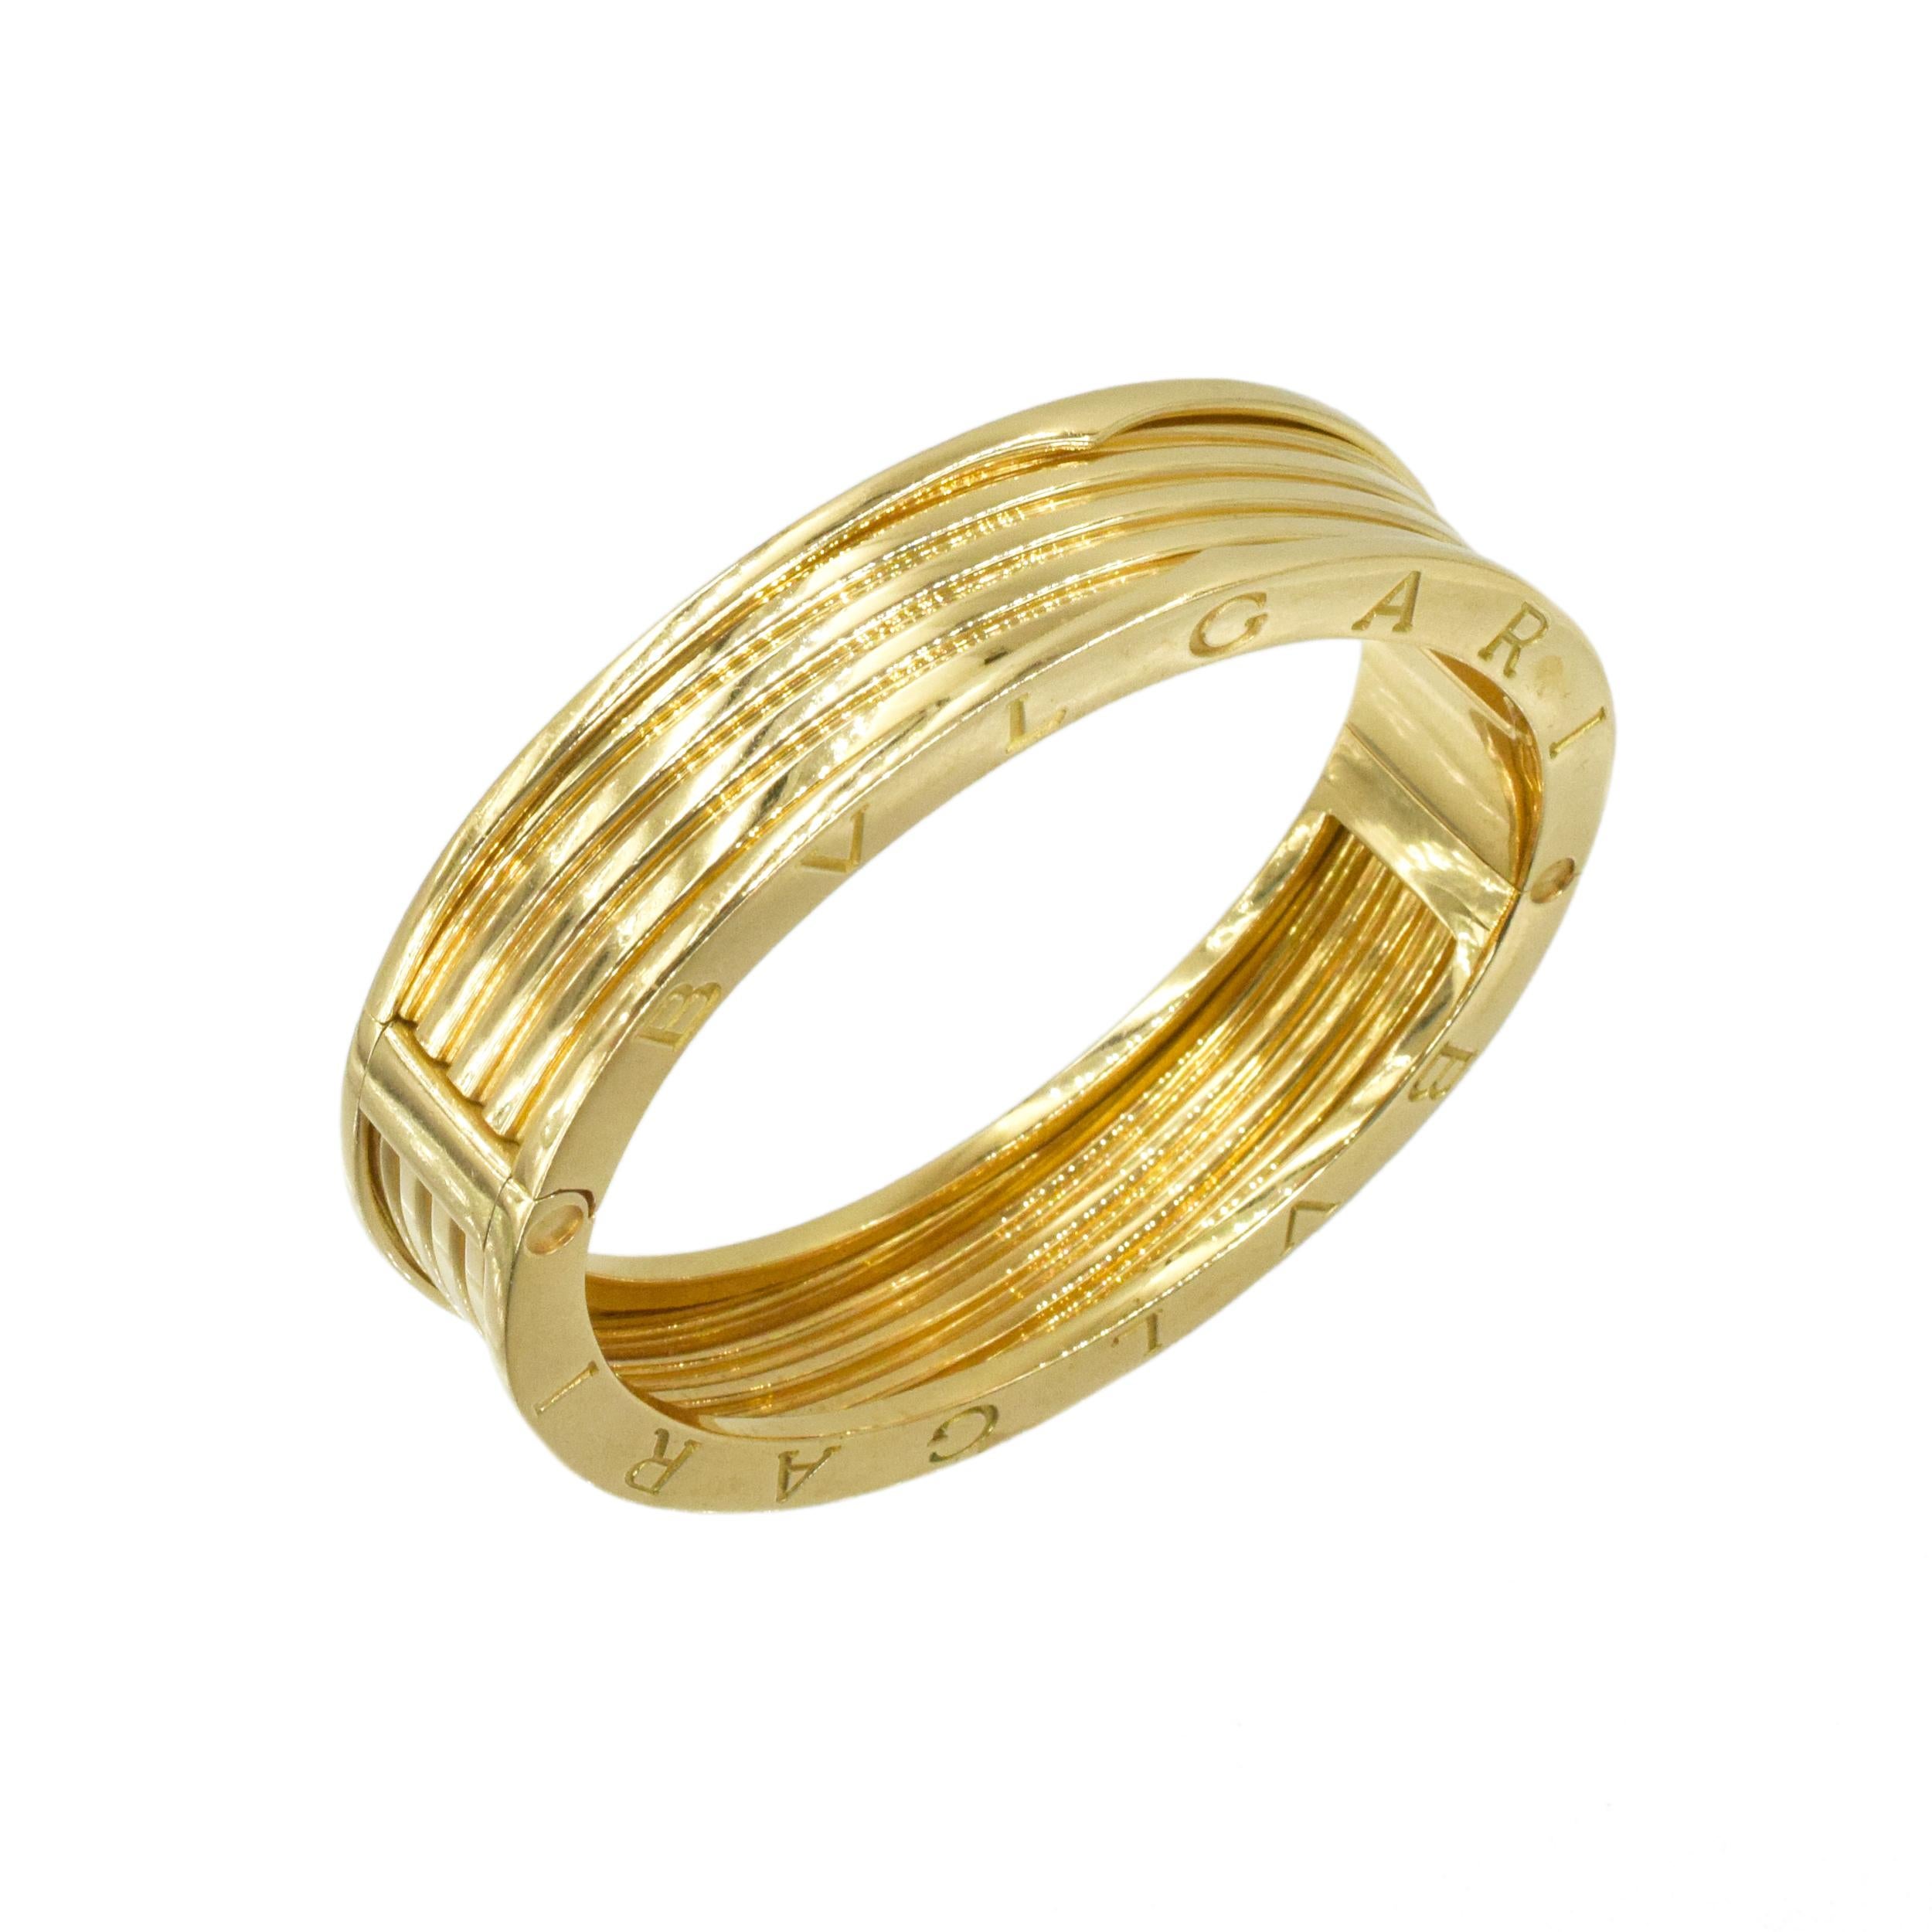 Bvlgari B Zero1 18k gold  Bangle Bracelet In Excellent Condition For Sale In New York, NY